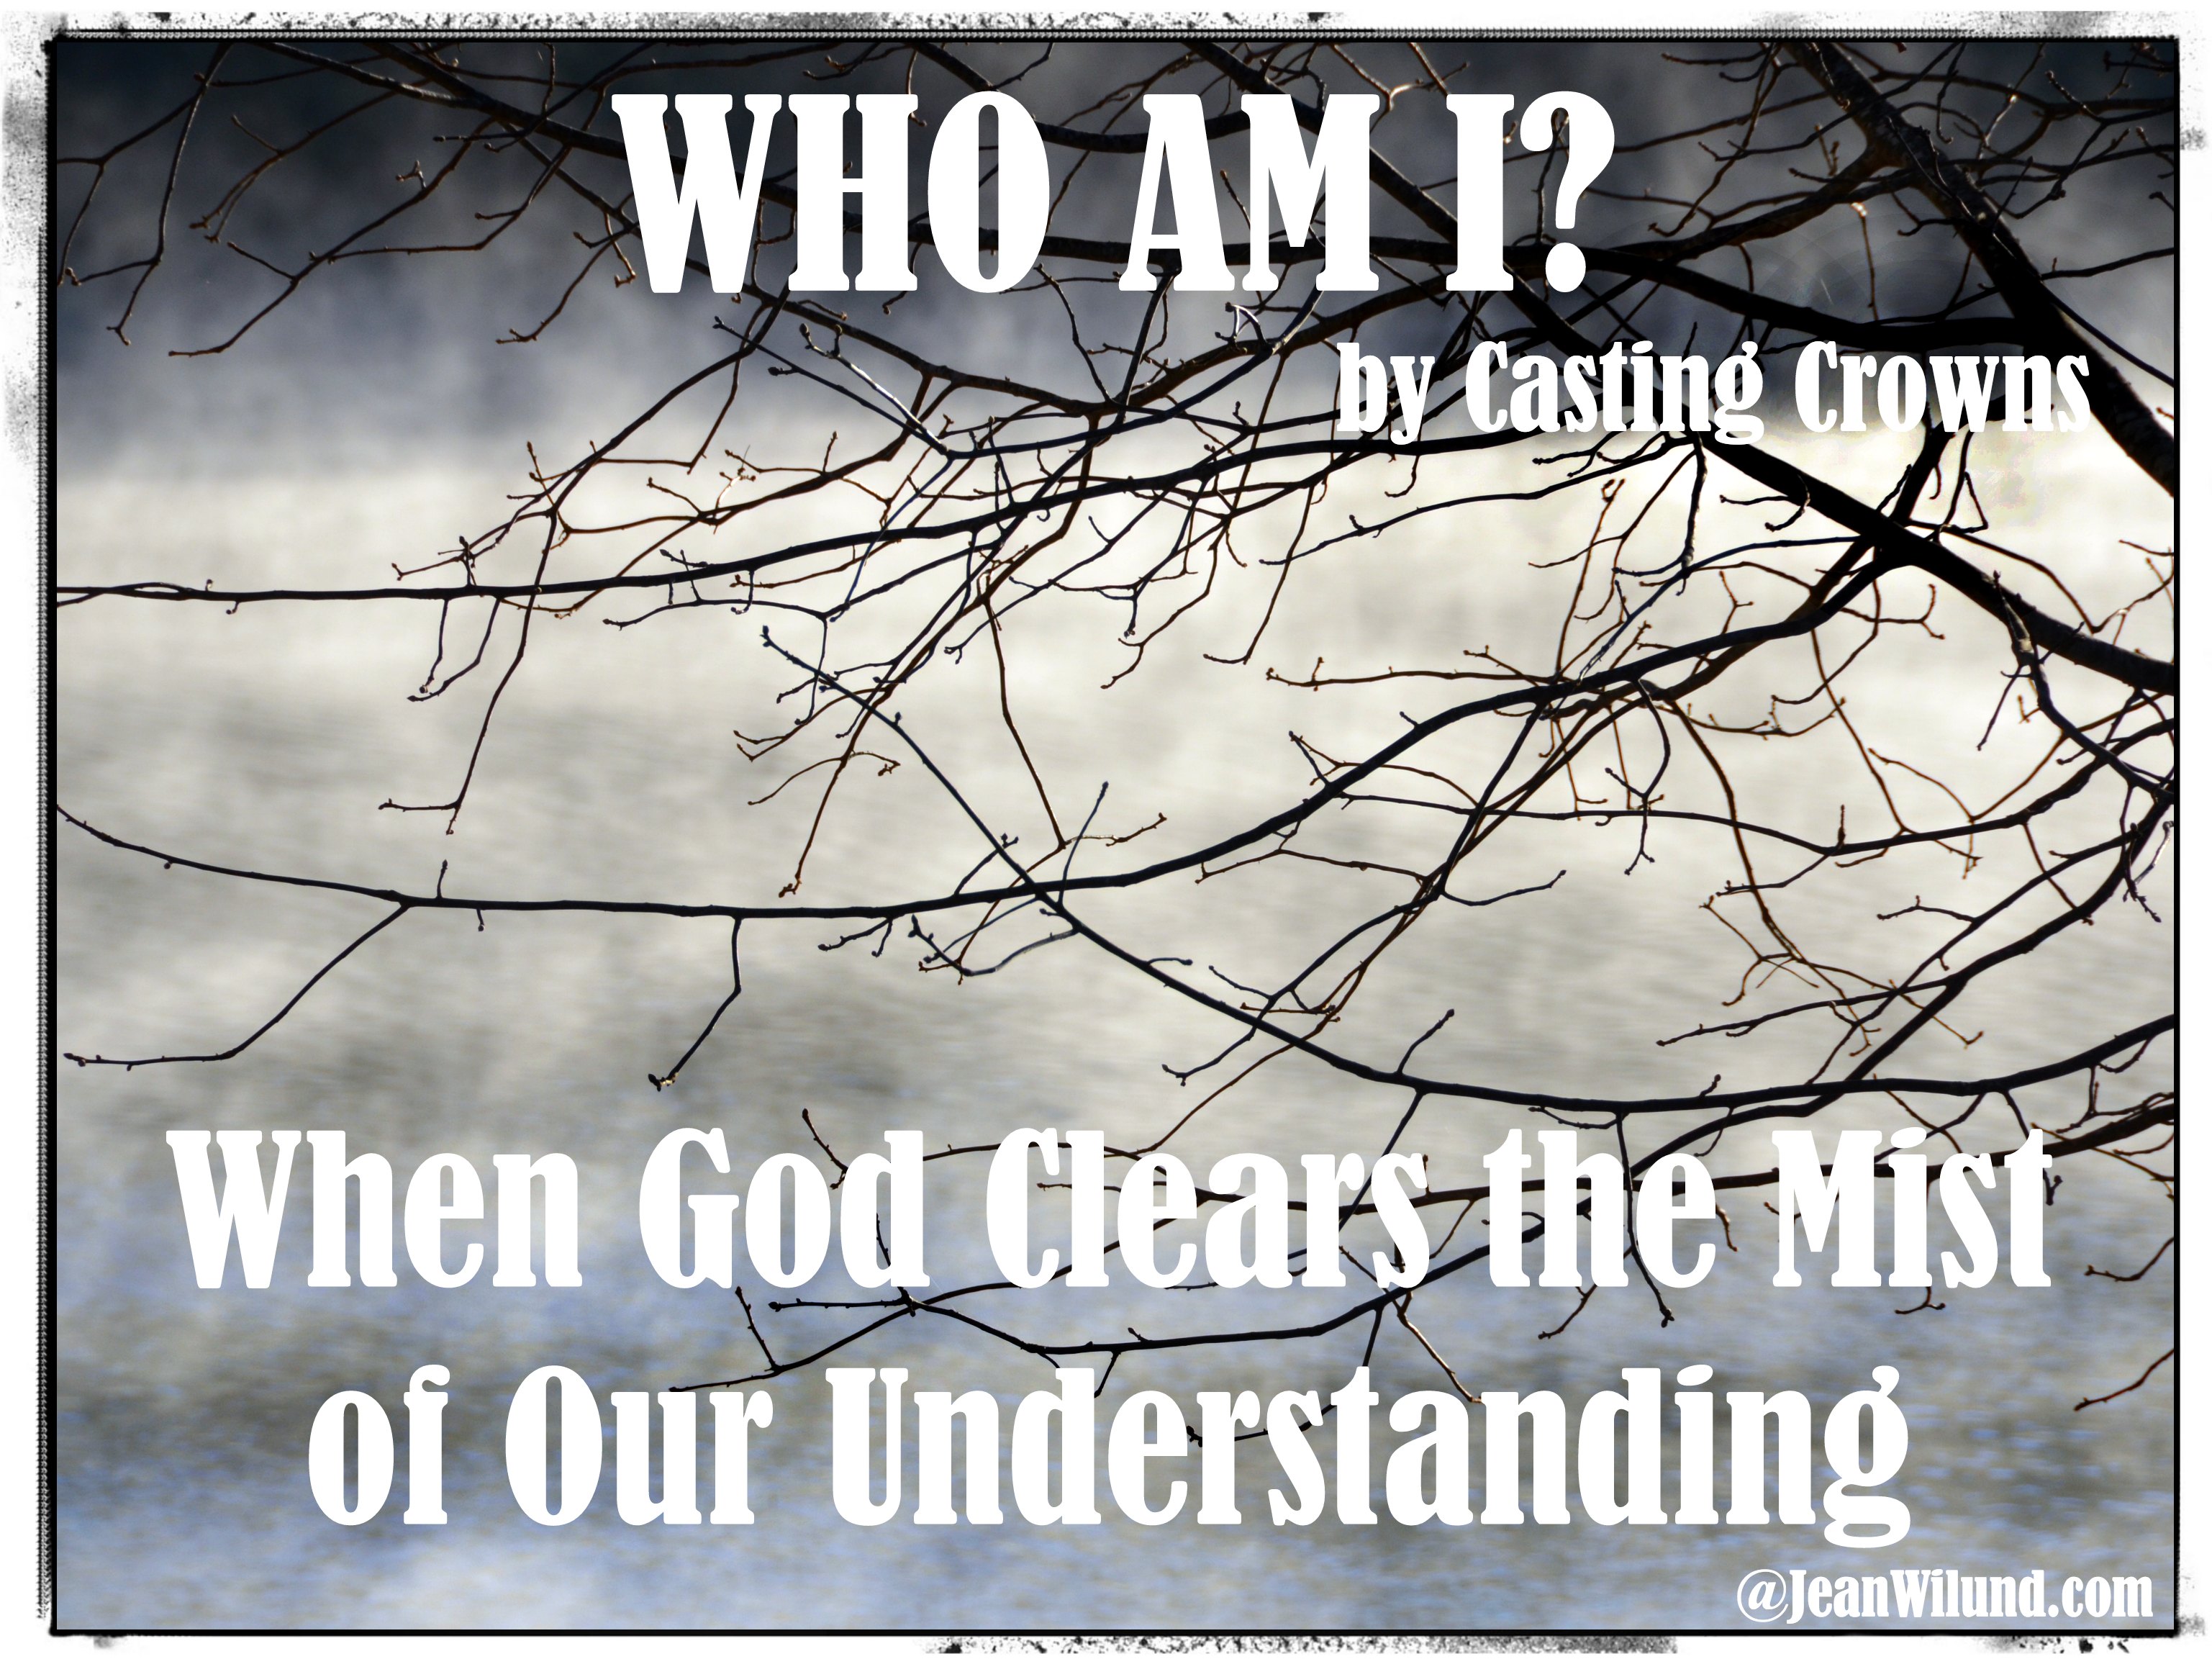 When God Clears the Mist of Our Understanding (Music Video: Who Am I? by Casting Crown)